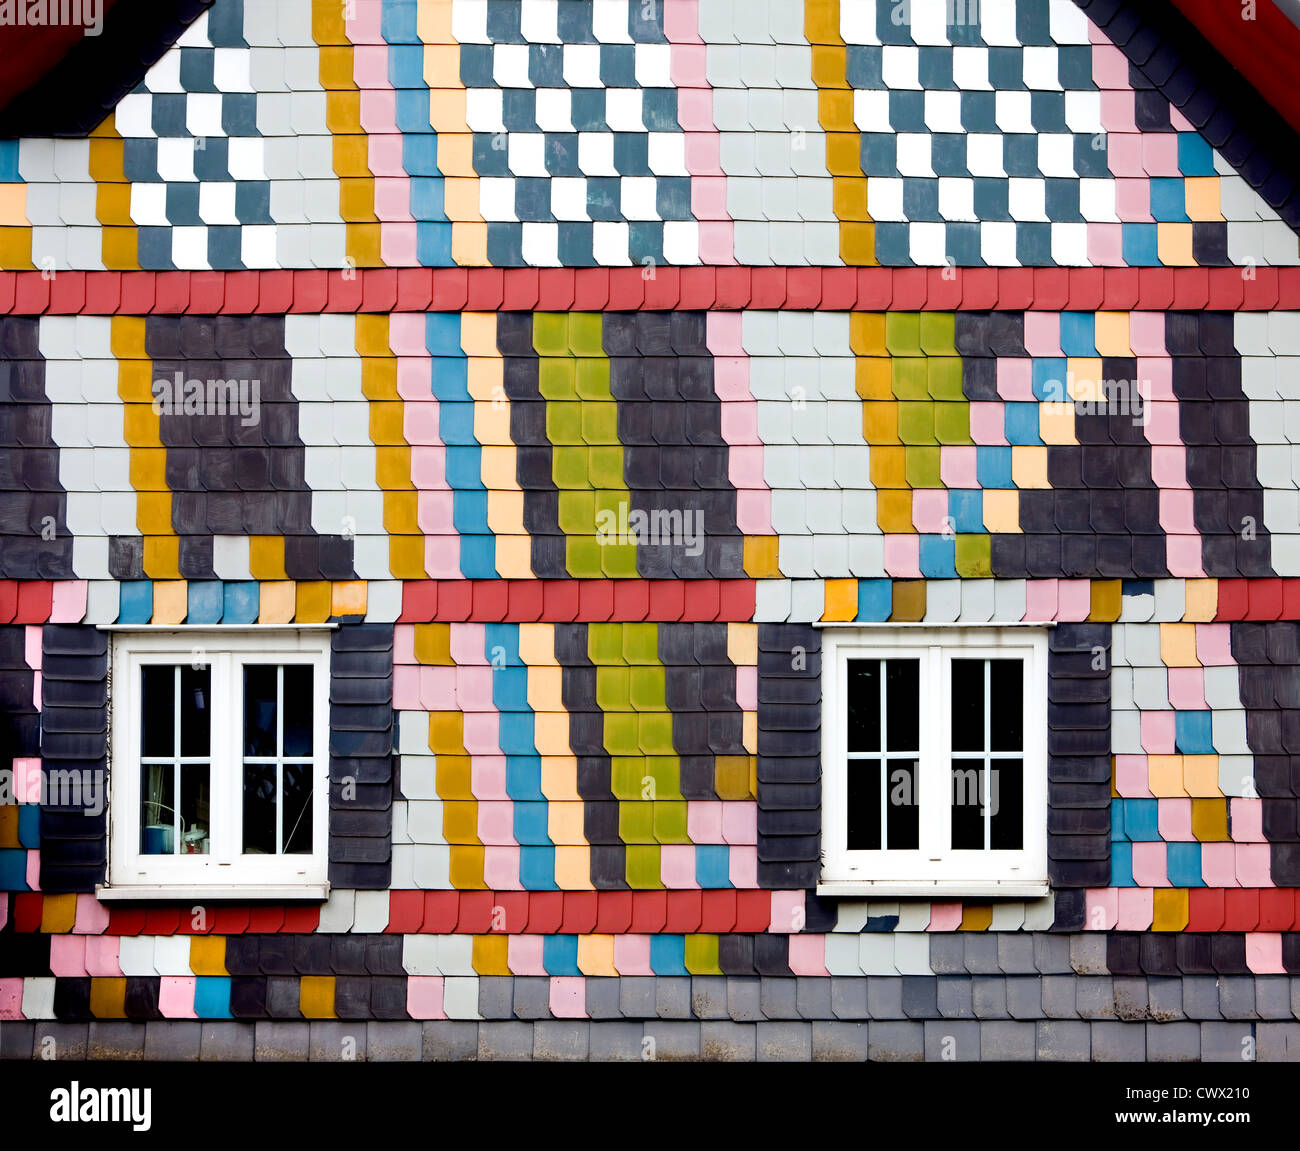 Cladding with coloured fibre cement boards like slate on an old house, Siegerland region, Germany, Europe Stock Photo